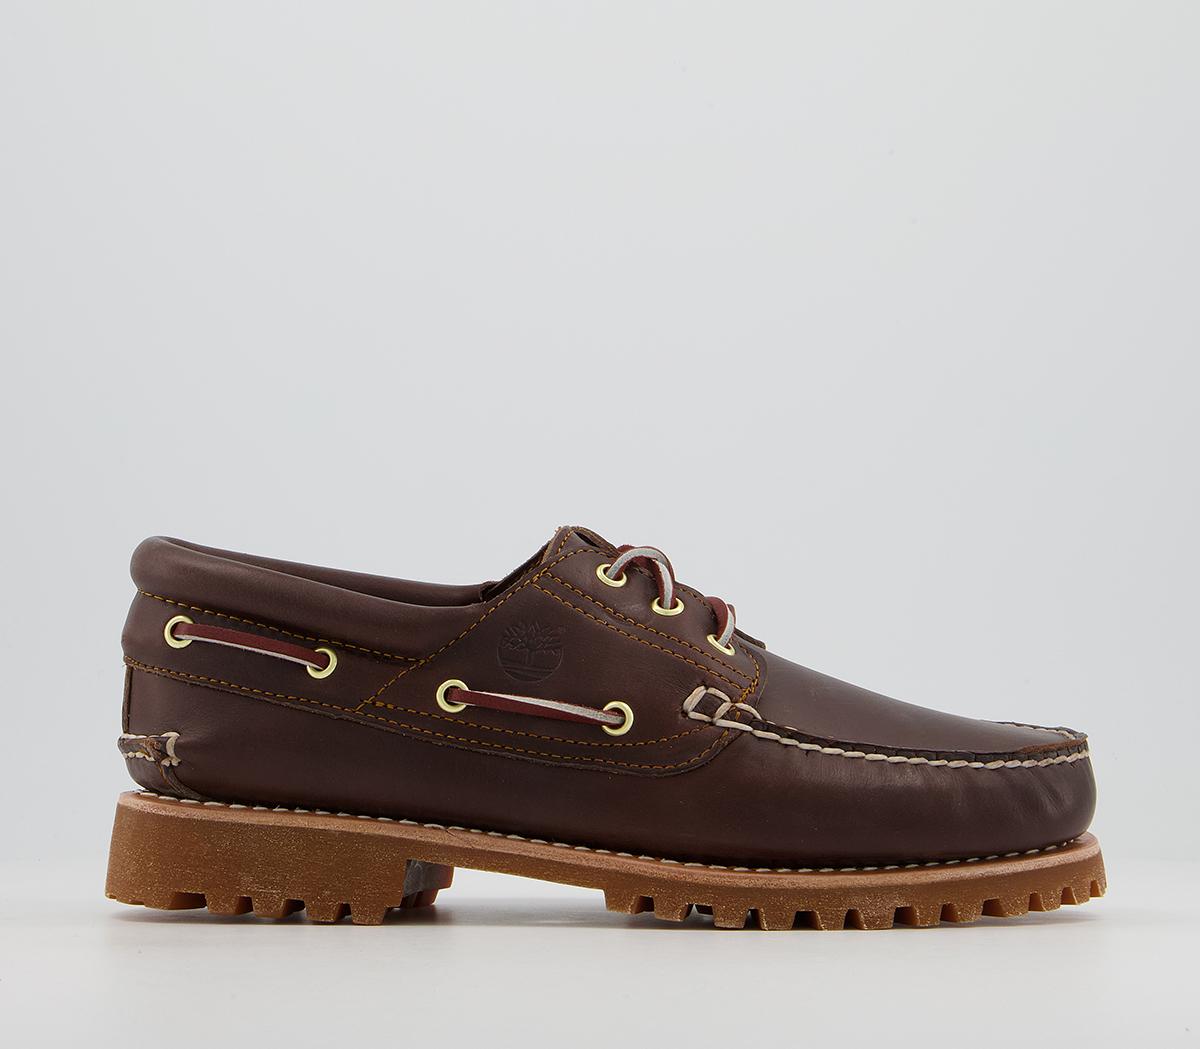 Timberland 3 Eye Classic Lug Boat Shoes Brown - Casual